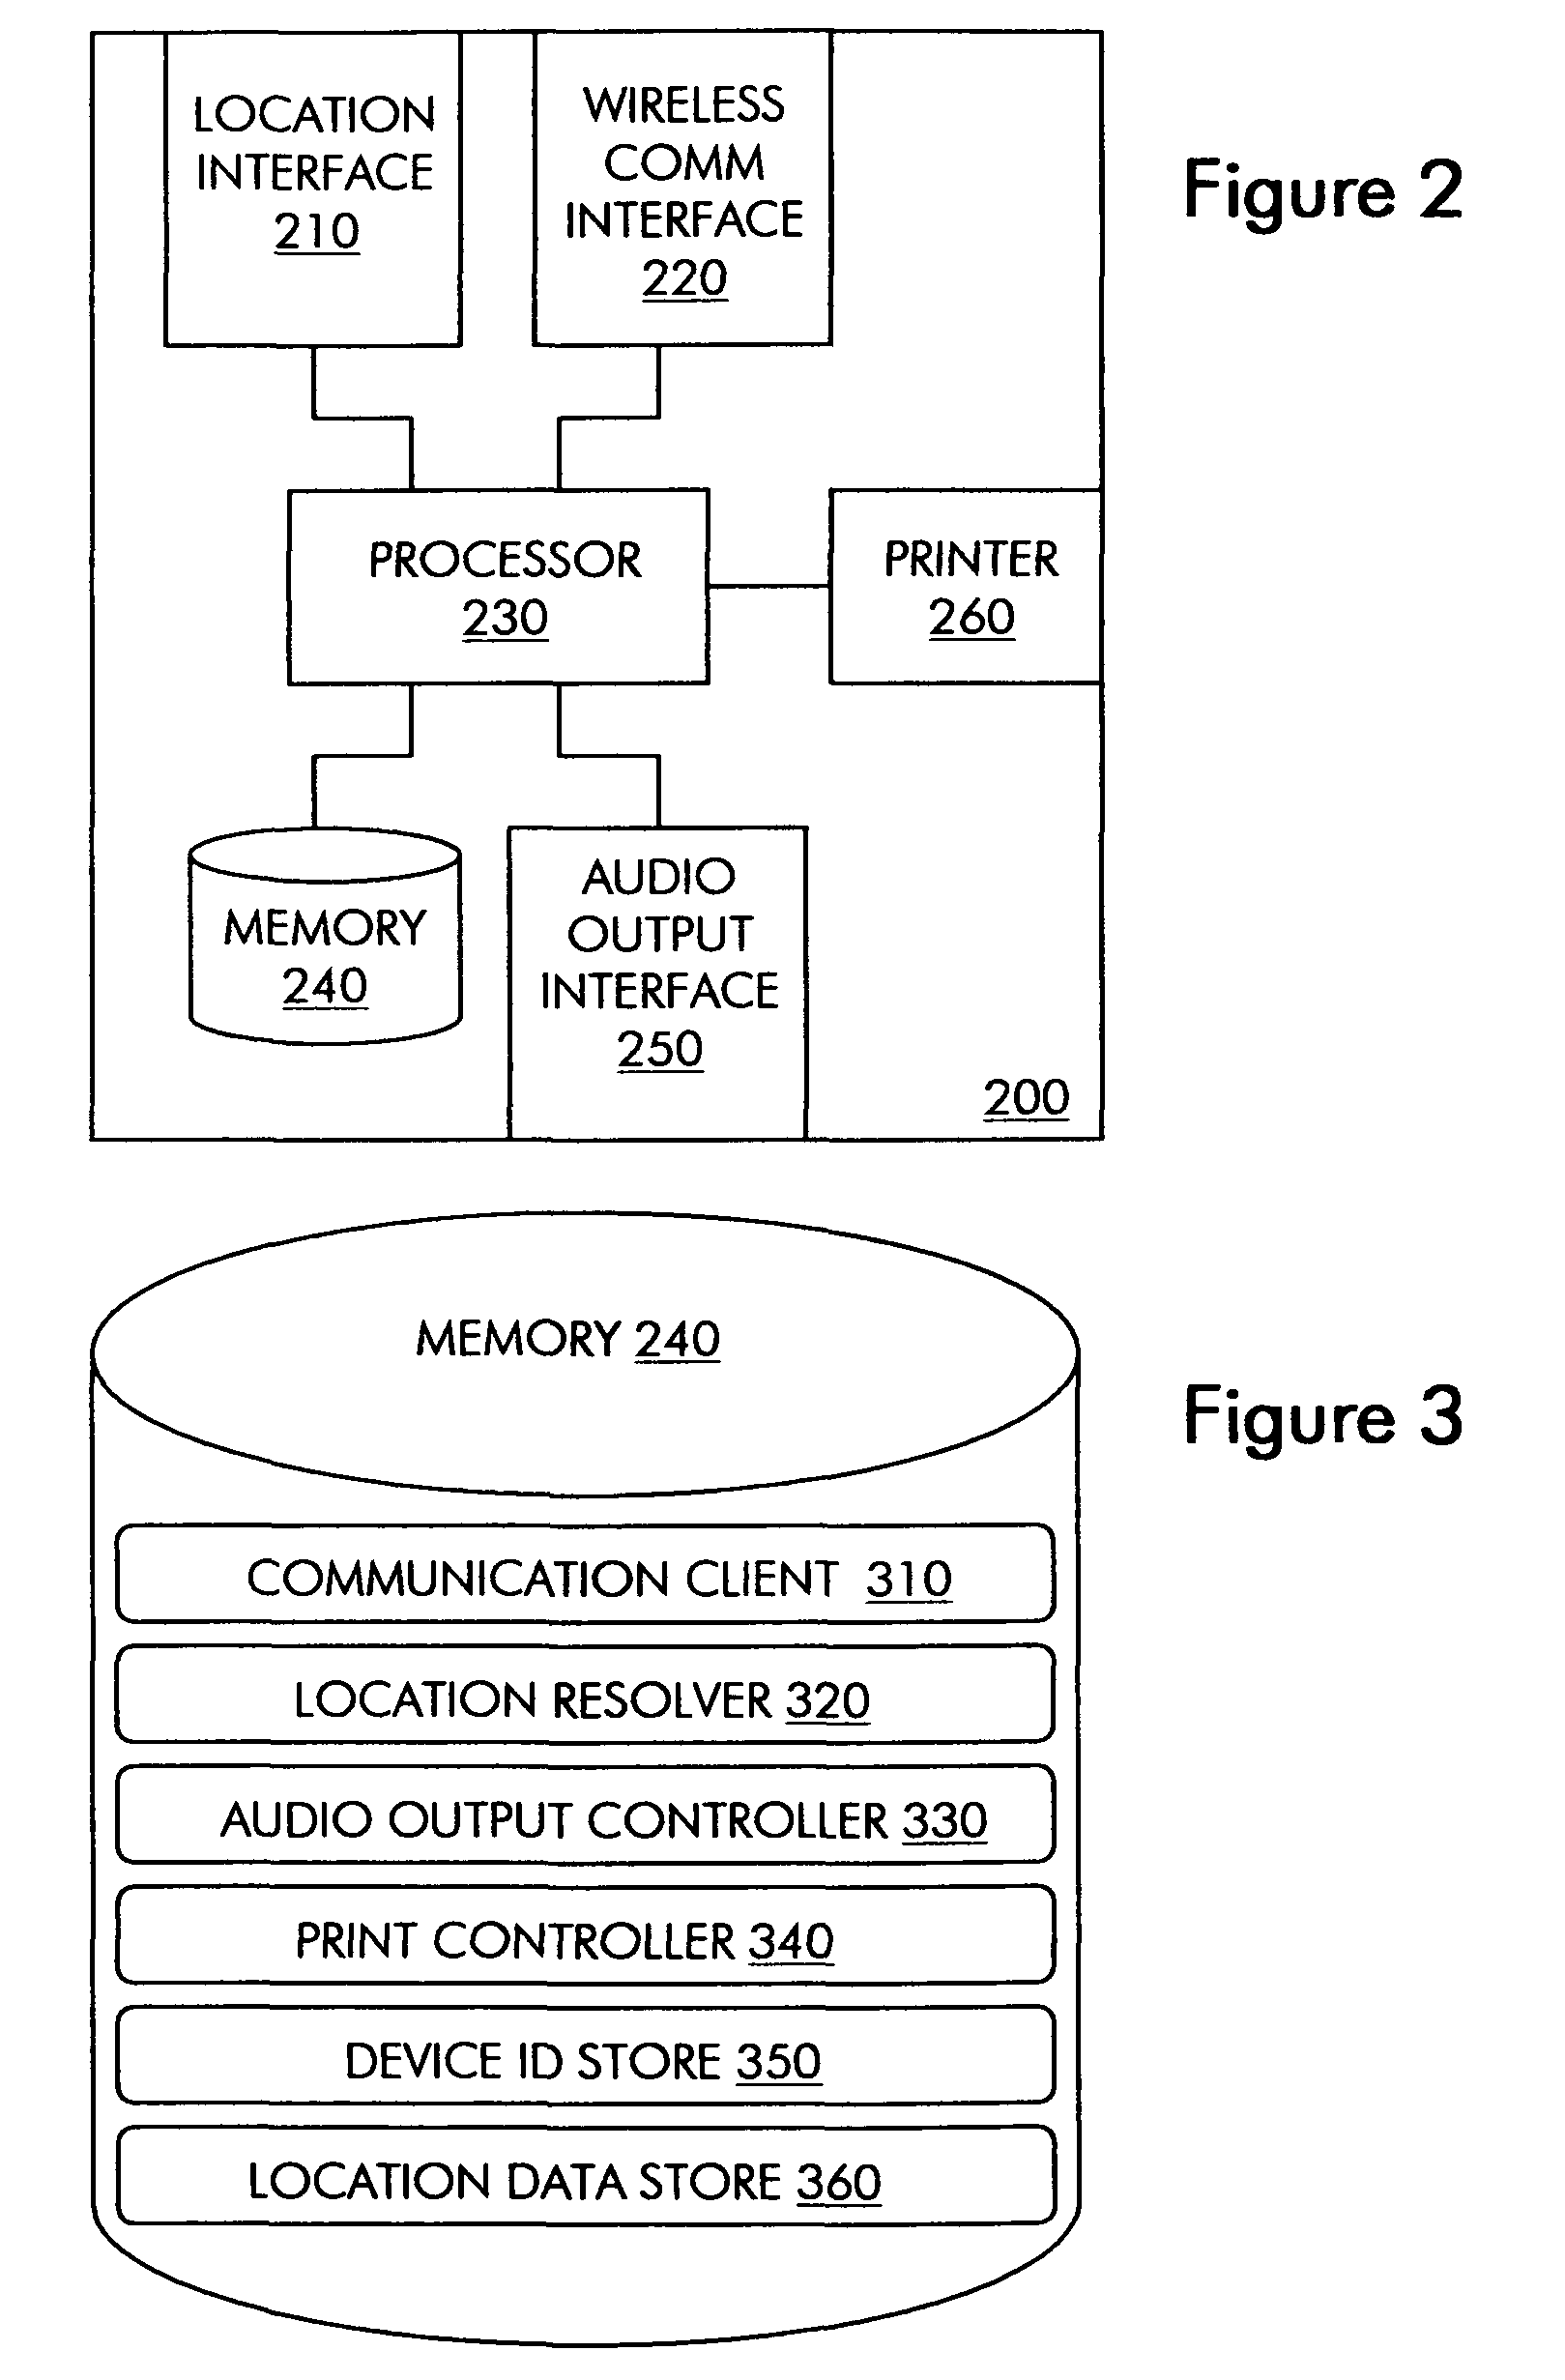 Methods and systems for selecting internet radio program break content using mobile device location